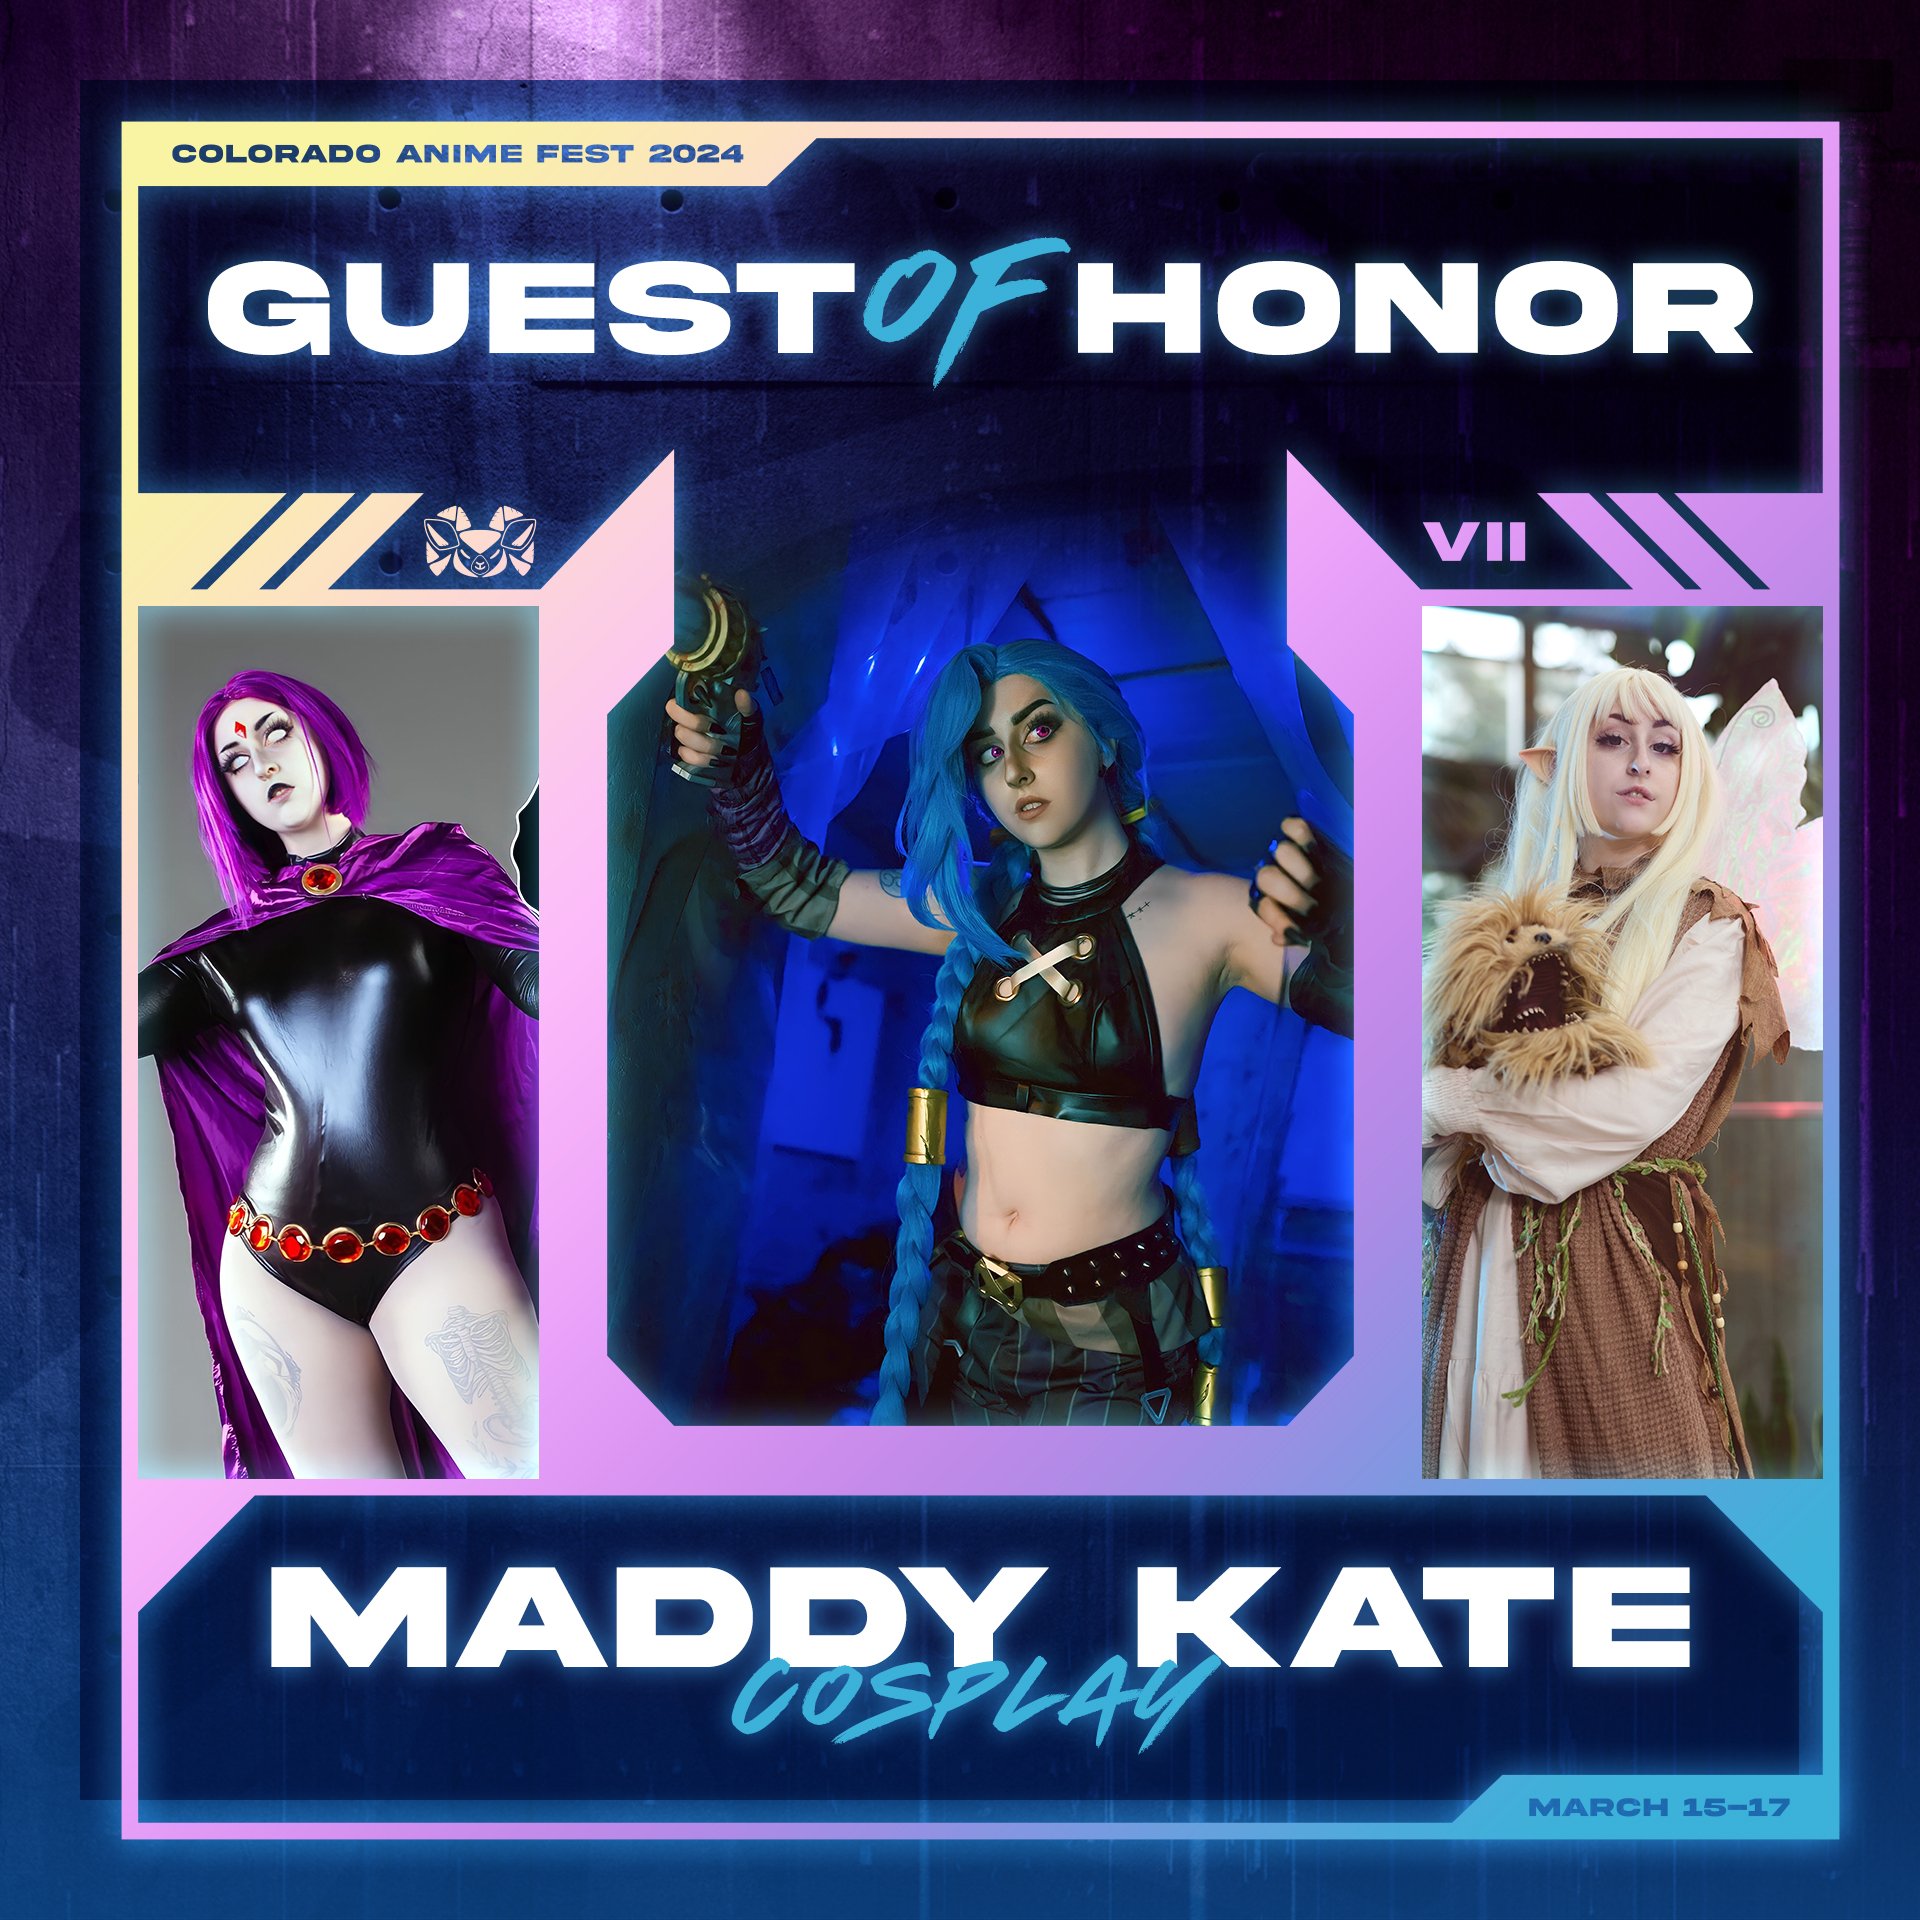 COAF_2024_Guest_Announcement_MaddyKateCosplay.jpg